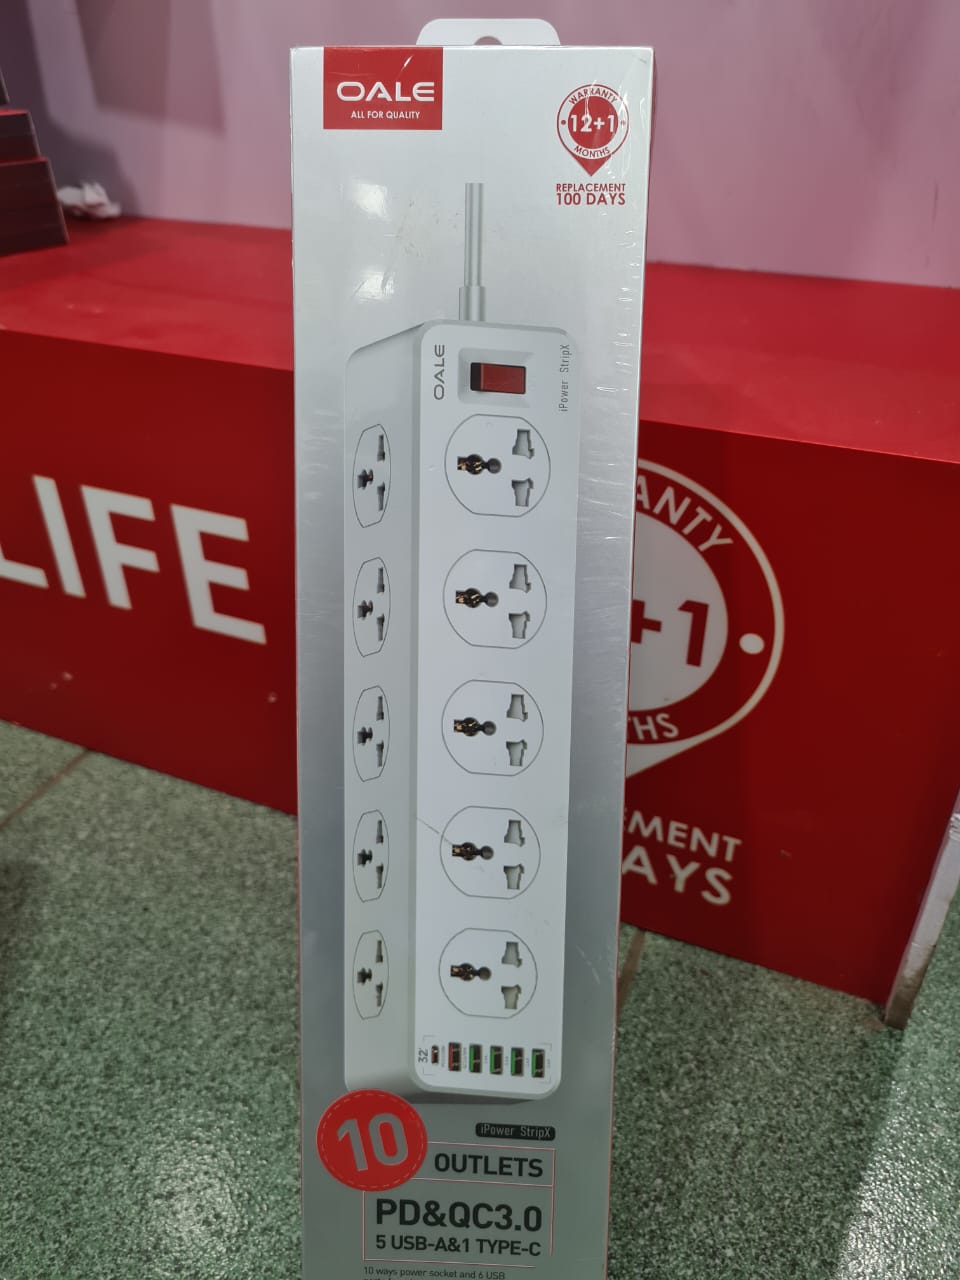 OALE Ipower StripX Extension with 10 Outlets and 6 USB Ports